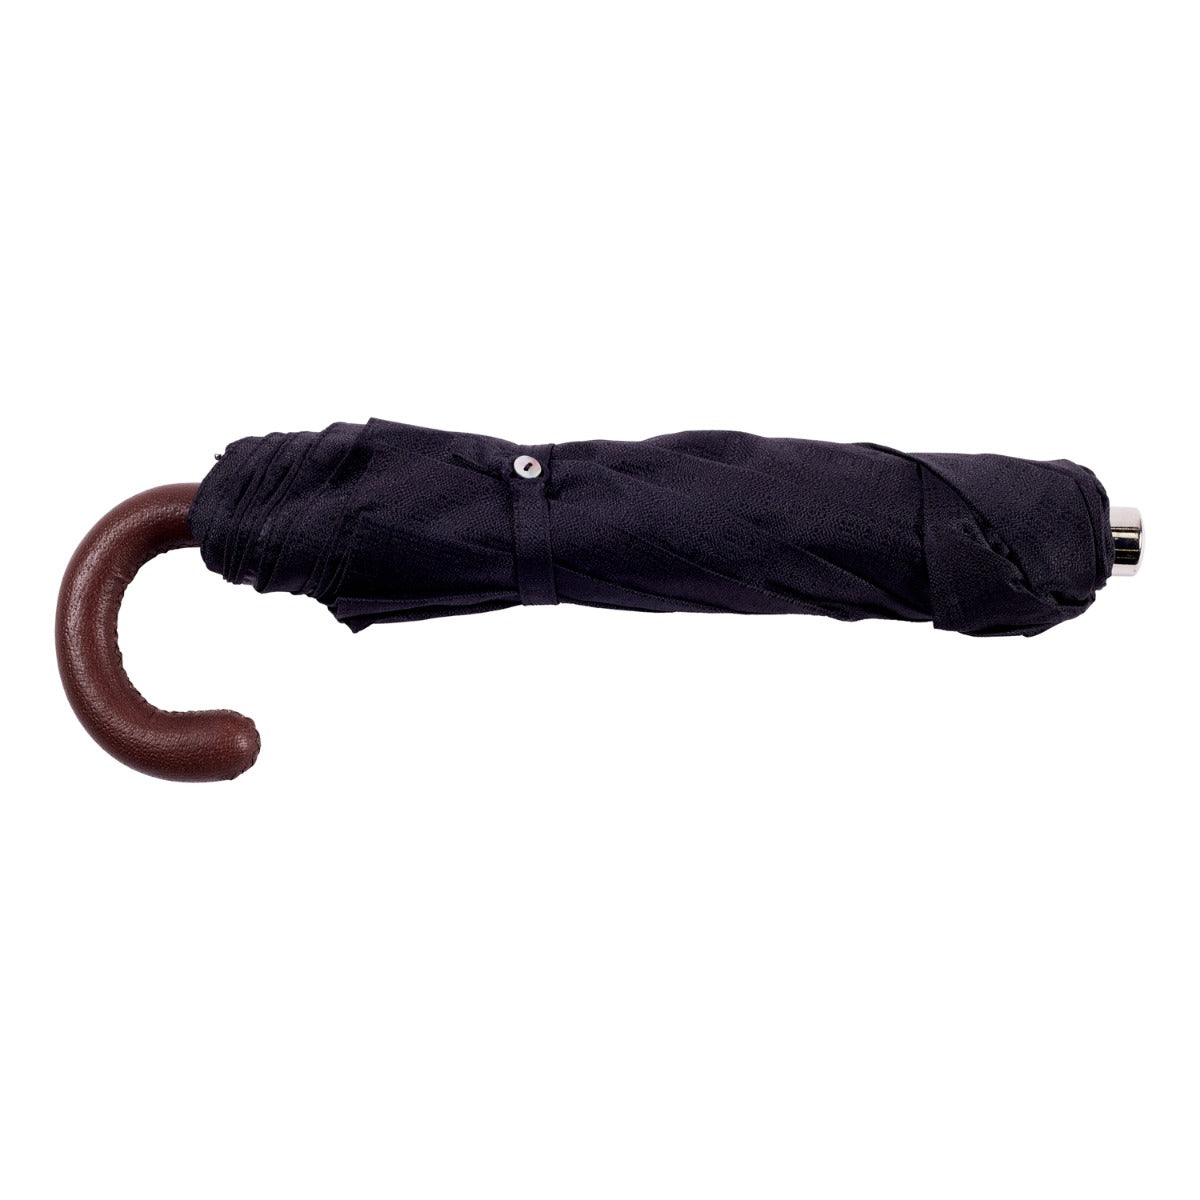 A handcrafted Brown Pigskin Travel Umbrella with Black Canopy, made by Italian umbrella makers and manufactured by KirbyAllison.com.